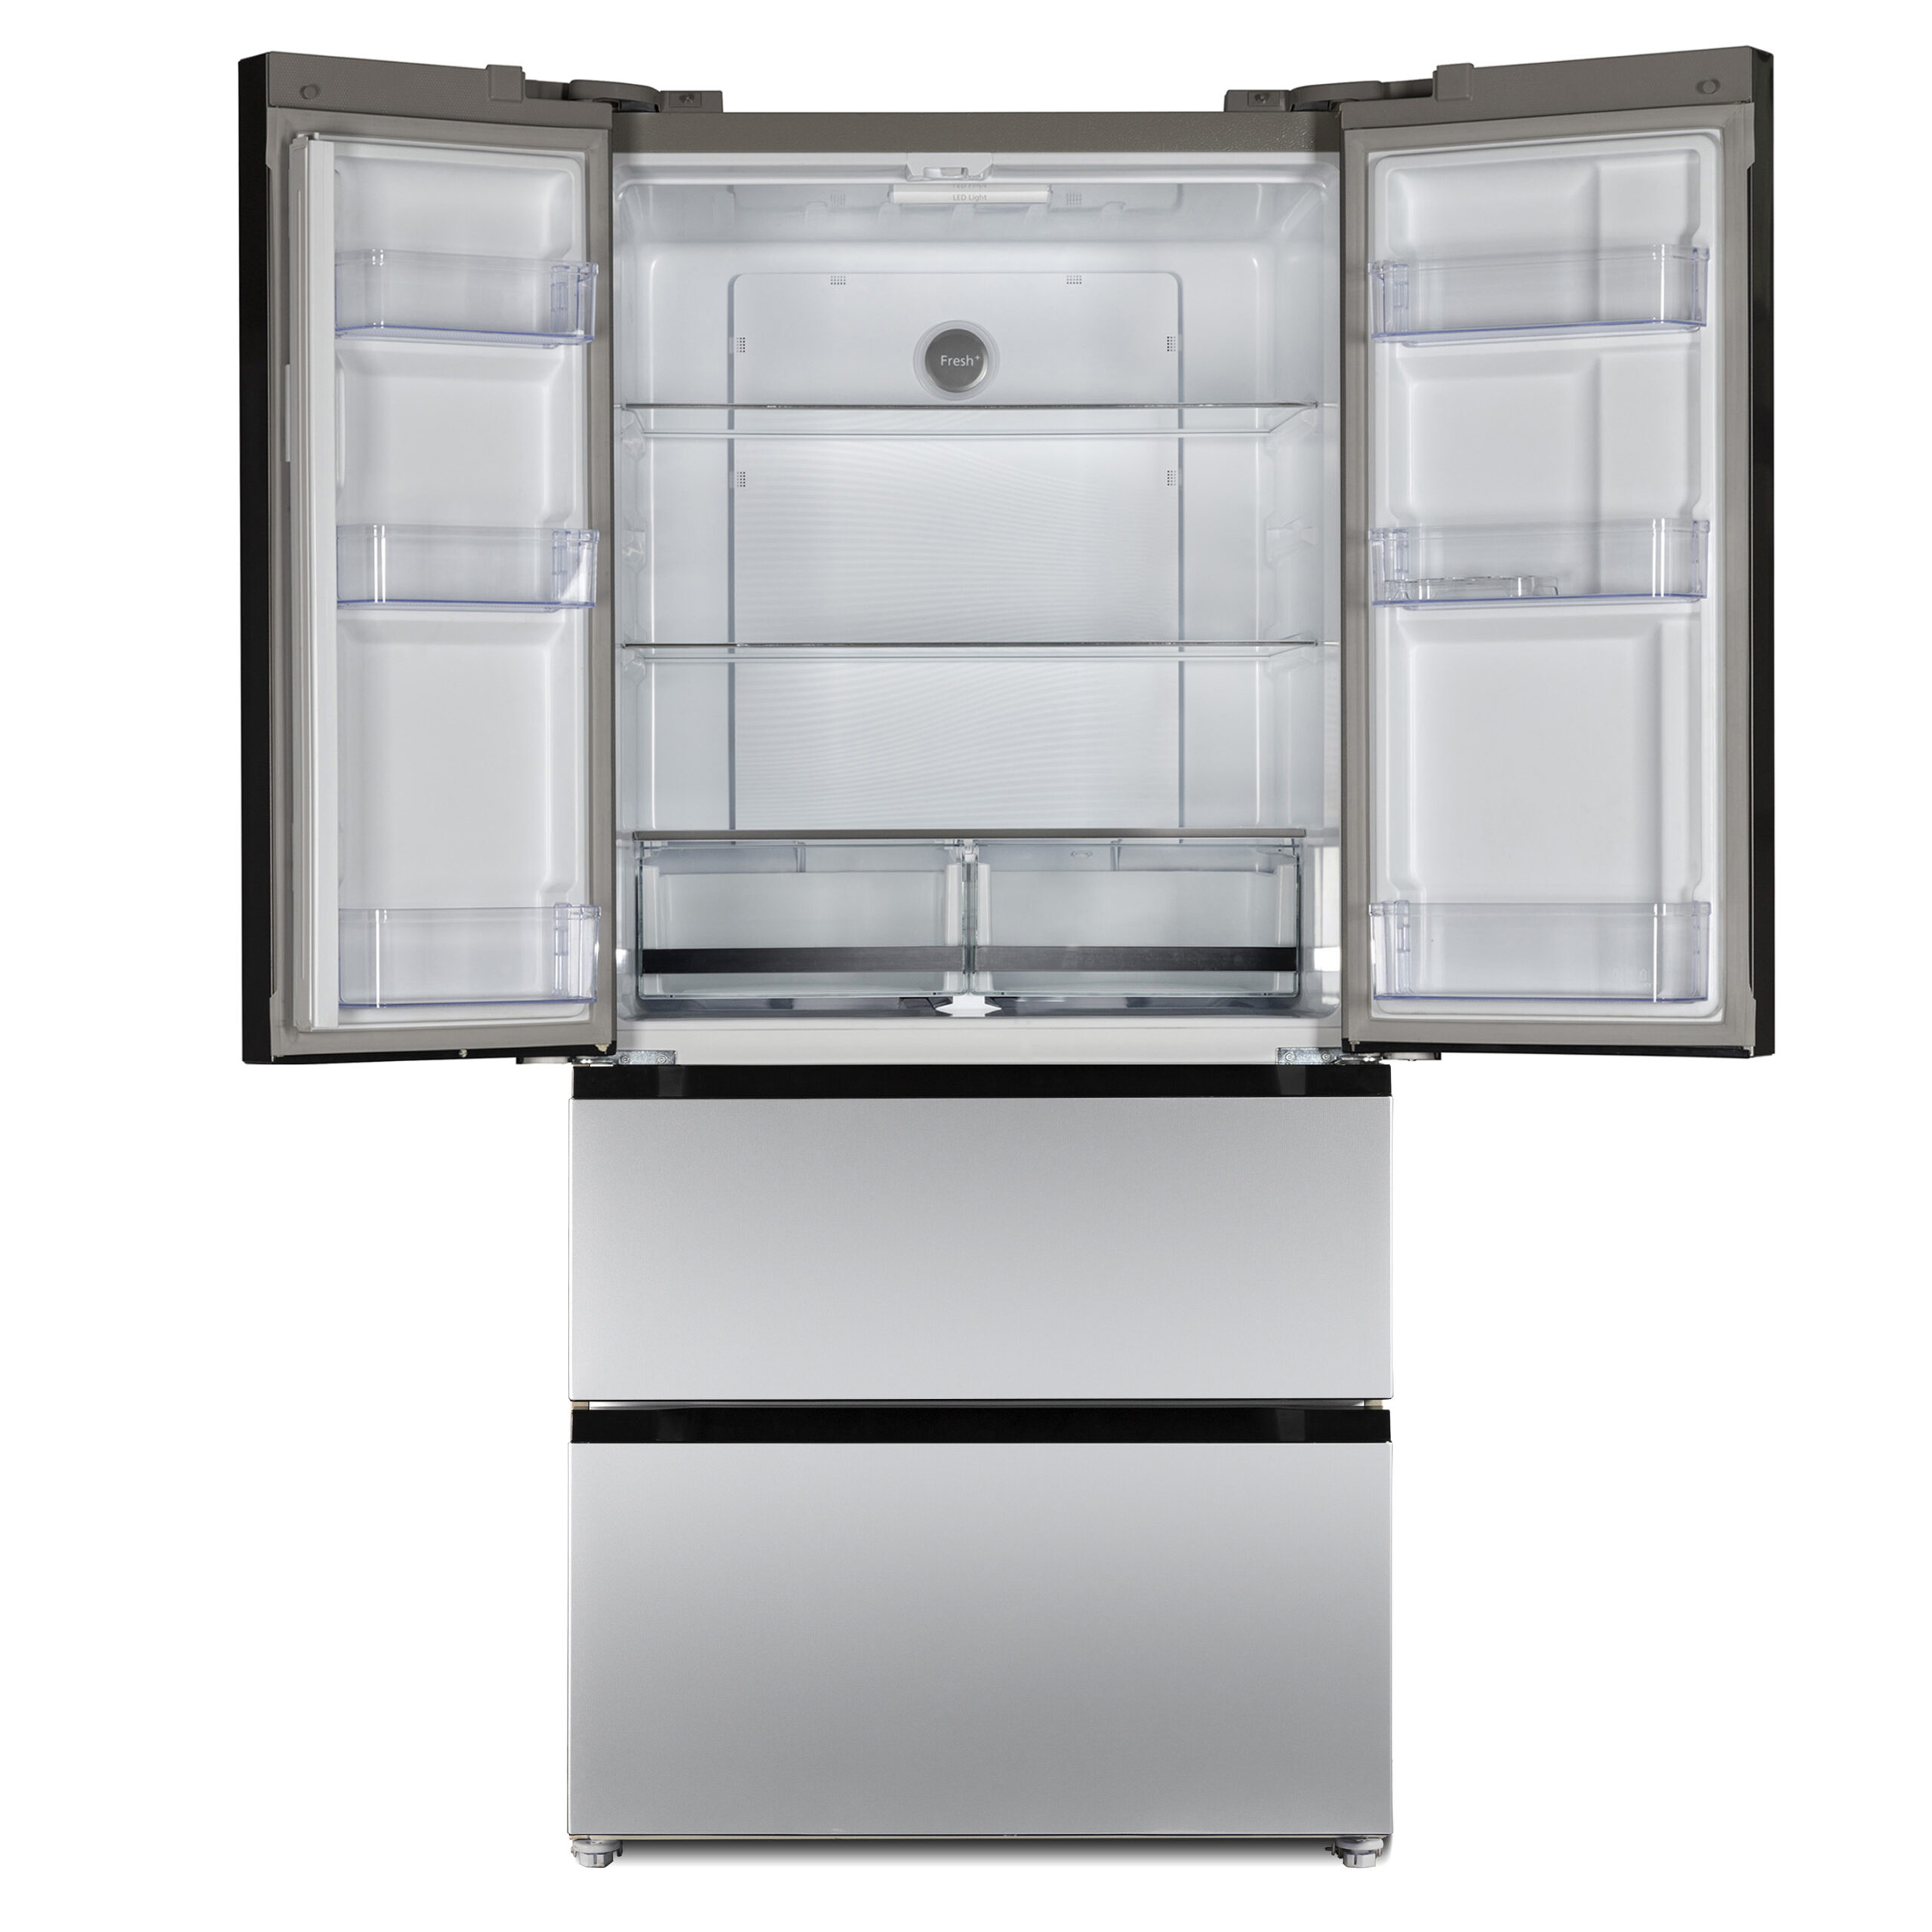 523L 513L French Foor Door Refrigerator for Home Kitchen Use Applicances